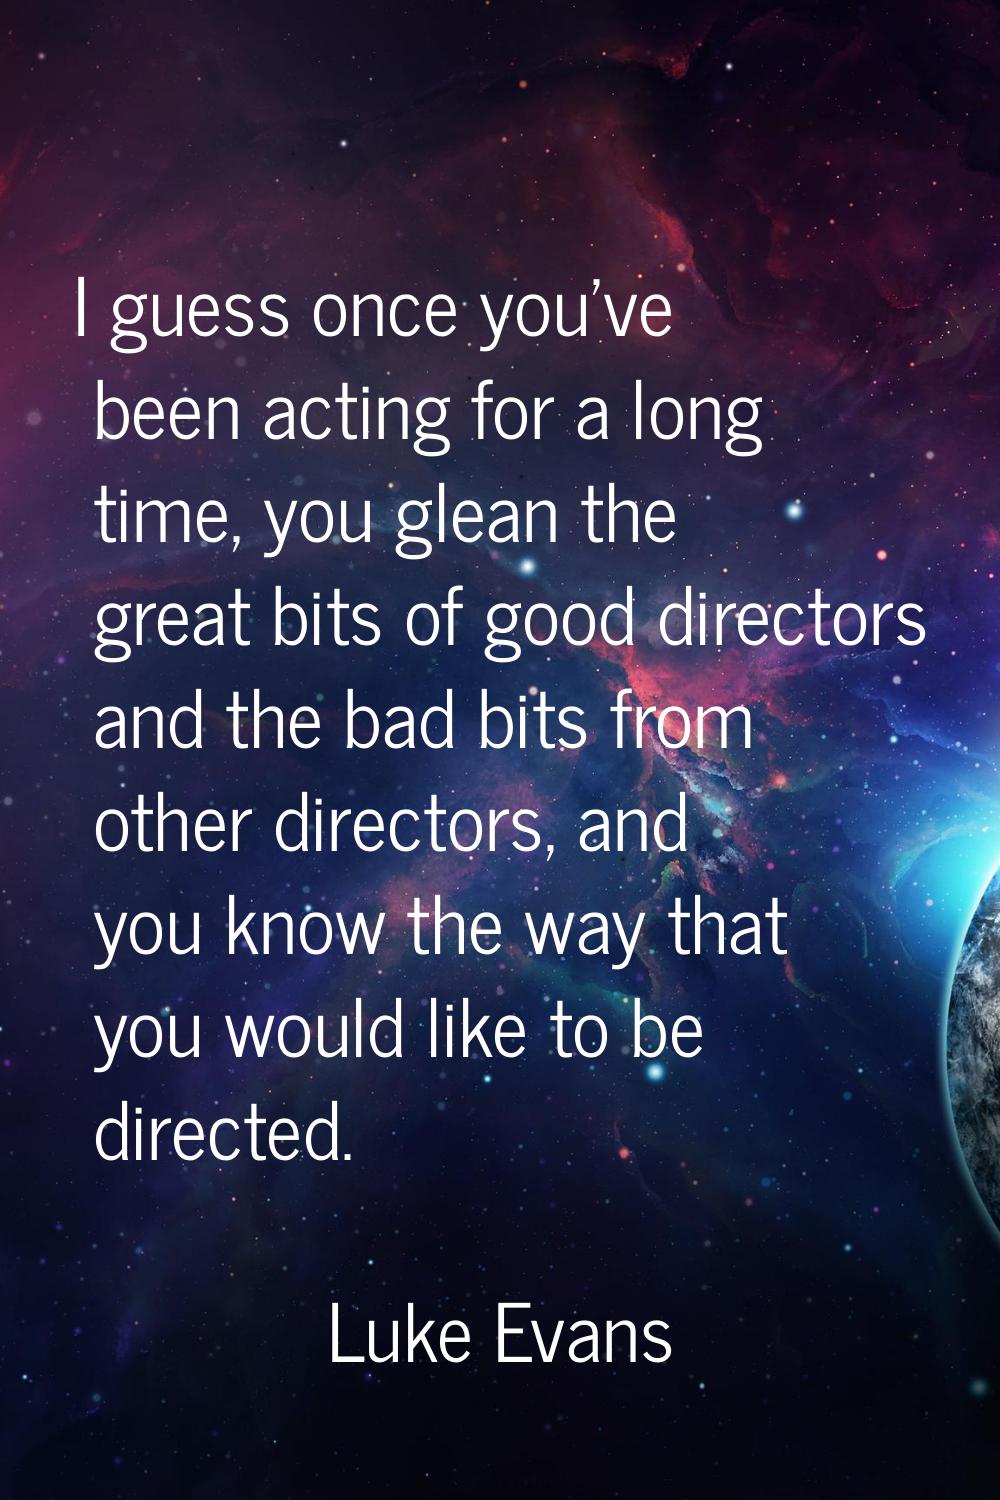 I guess once you've been acting for a long time, you glean the great bits of good directors and the